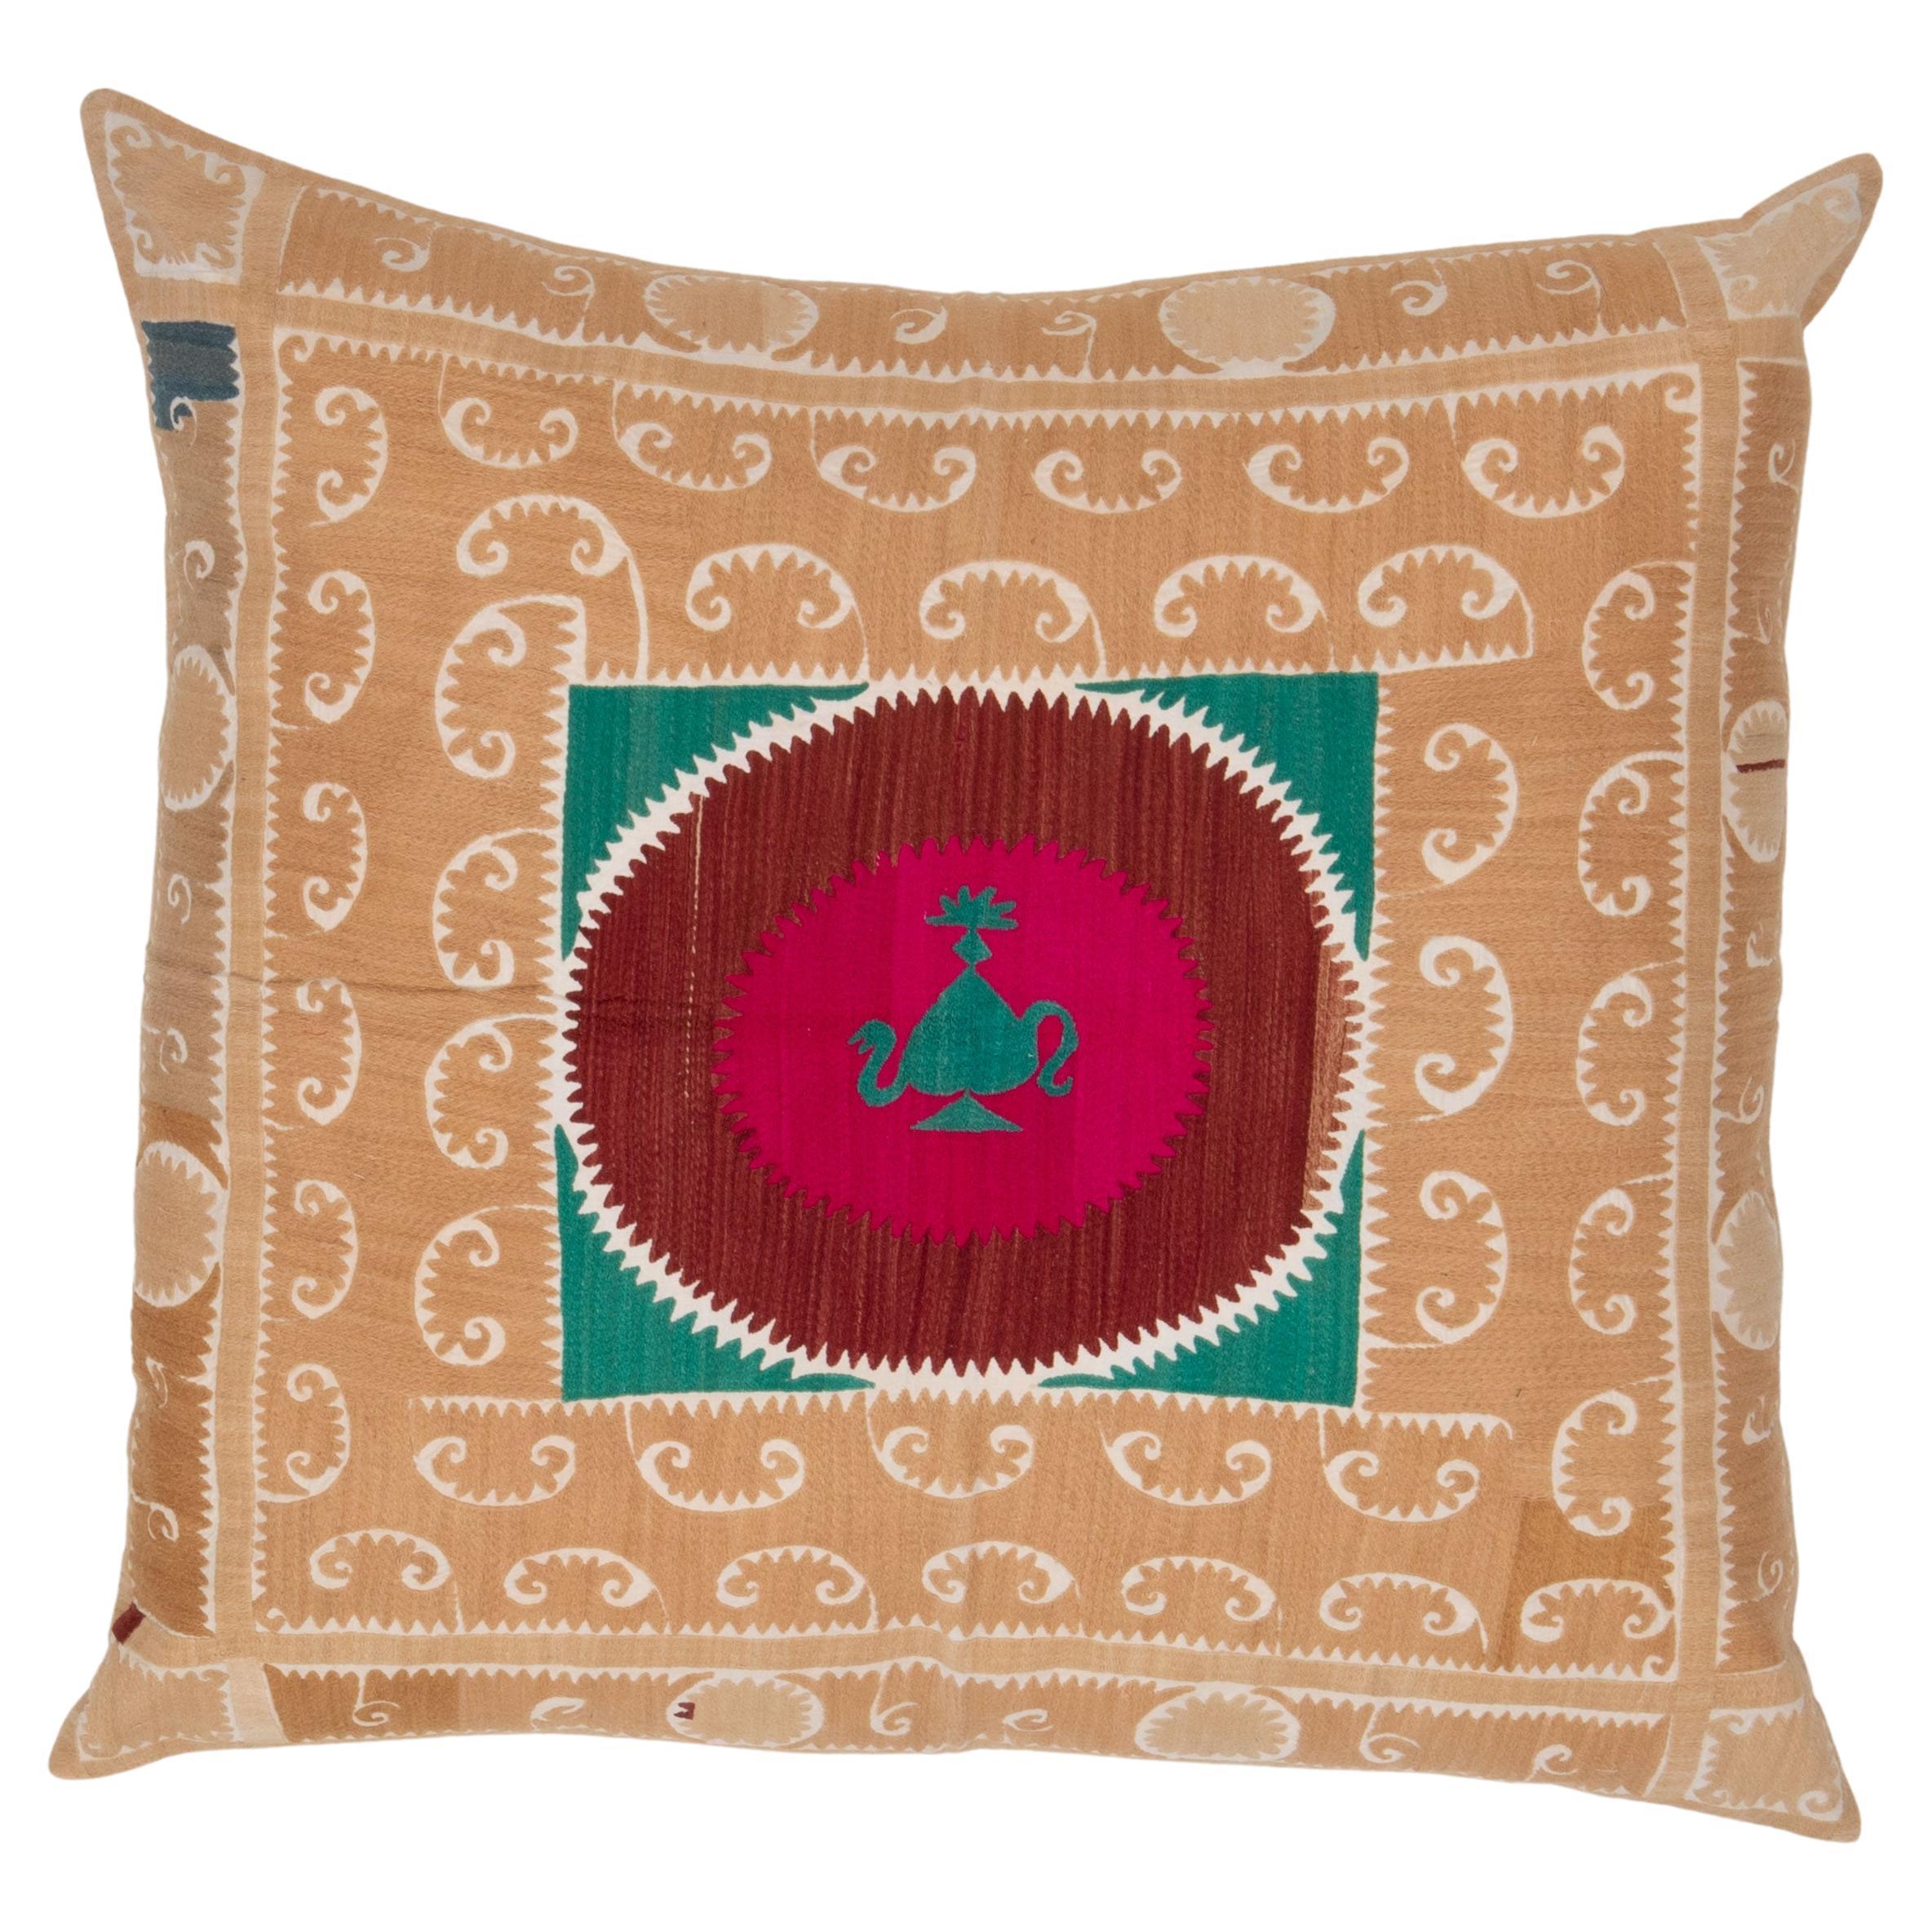 Giant Floor Cushion Made from a Vintage Uzbek Suzani For Sale